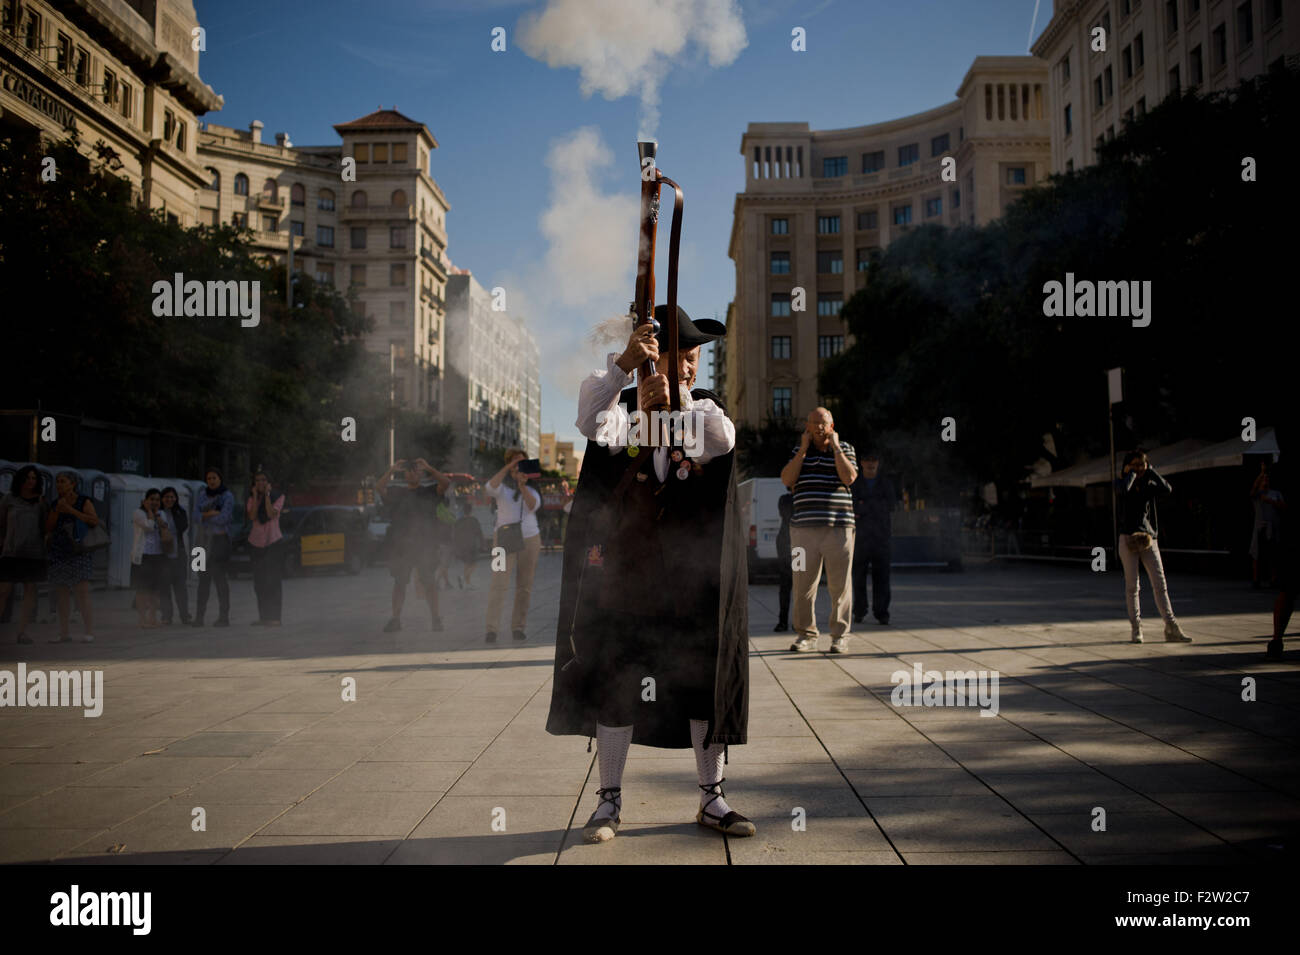 Barcelona, Catalonia, Spain. 24th Sep, 2015. A trabucaire shoots his blunderbuss through the streets of Barcelona on the occasion of the celebrations of the Merce Festival (Festes de la Merce) on 24 September 2015, Spain. The Galejada Trabucairemarks the beginning of the day of the patron saint of Barcelona, La Merce. Men and women dressed as ancient Catalan bandits take to the streets of the old part of Barcelona and cause a loud noise with his blunderbusses full of gunpowder. © Jordi Boixareu/ZUMA Wire/Alamy Live News Stock Photo